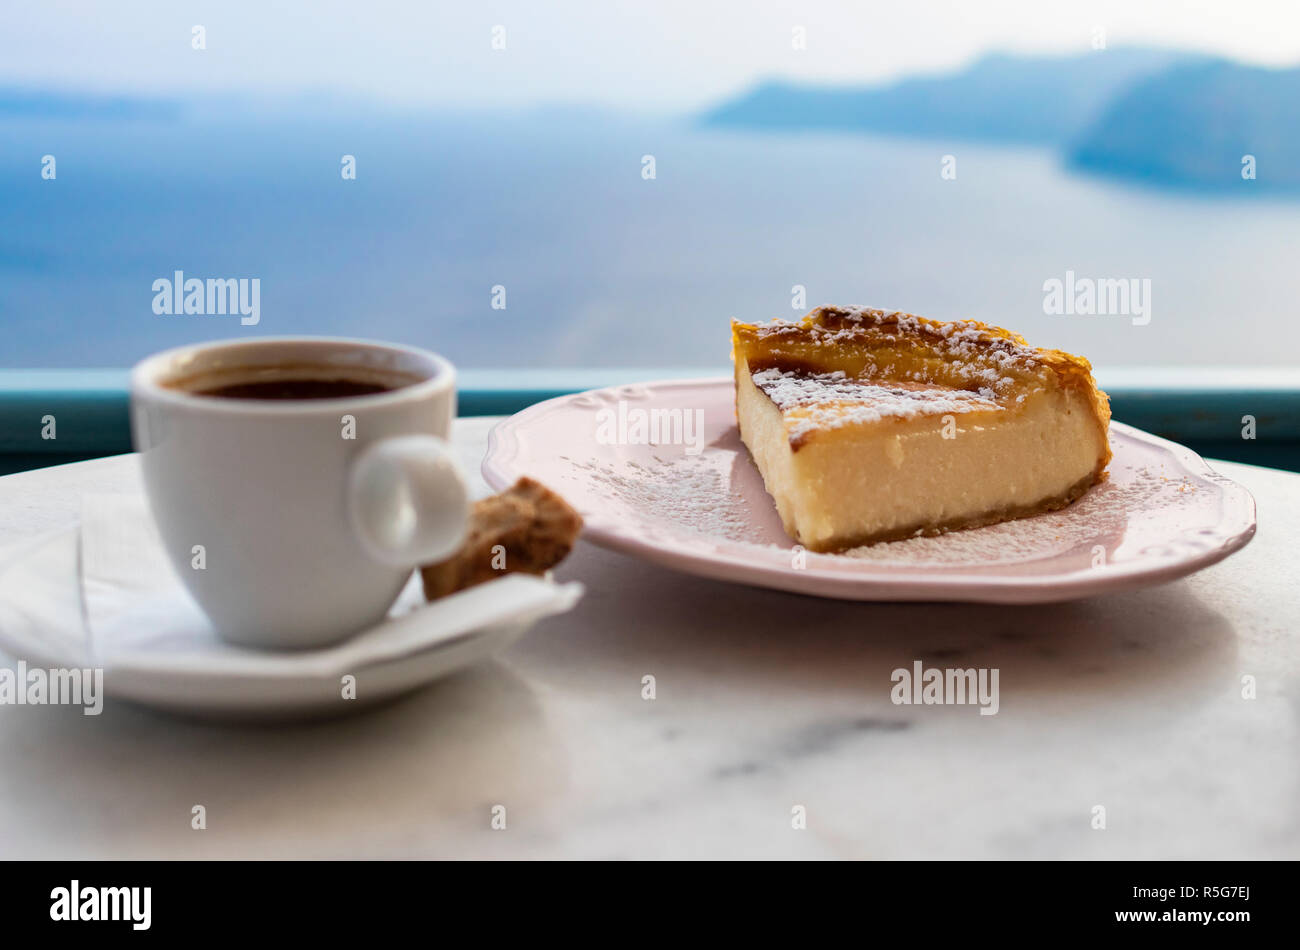 Coffee and cheese cake with sea view in the background, served in a beach cafe in Oia, Santorini, Greece Stock Photo